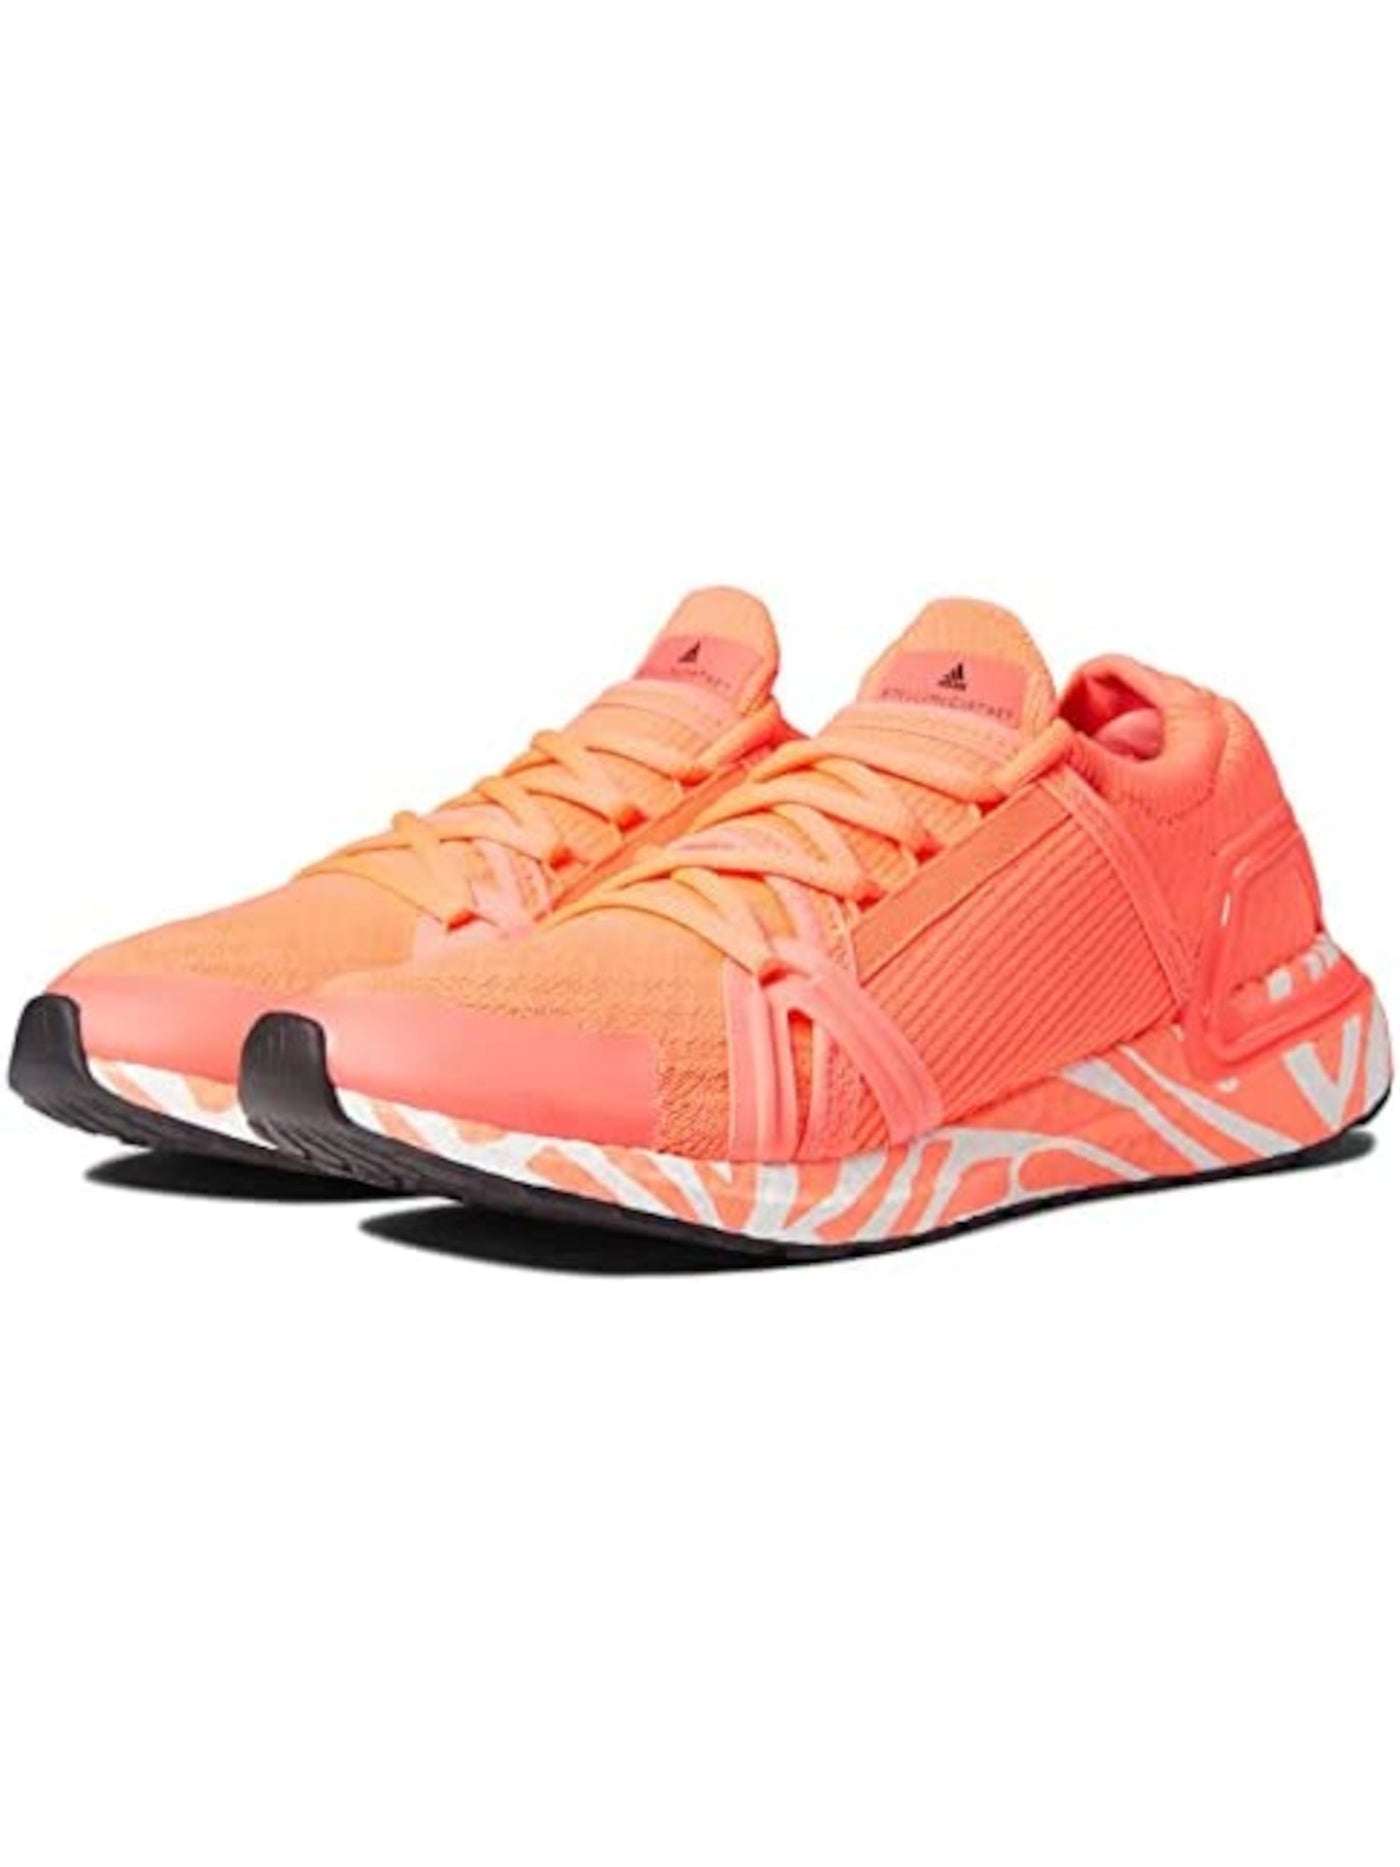 ADIDAS Womens Orange Stretch Removable Insole Comfort Stella Mccartney Asmc Ultraboost Round Toe Wedge Lace-Up Athletic Sneakers Shoes 9.5